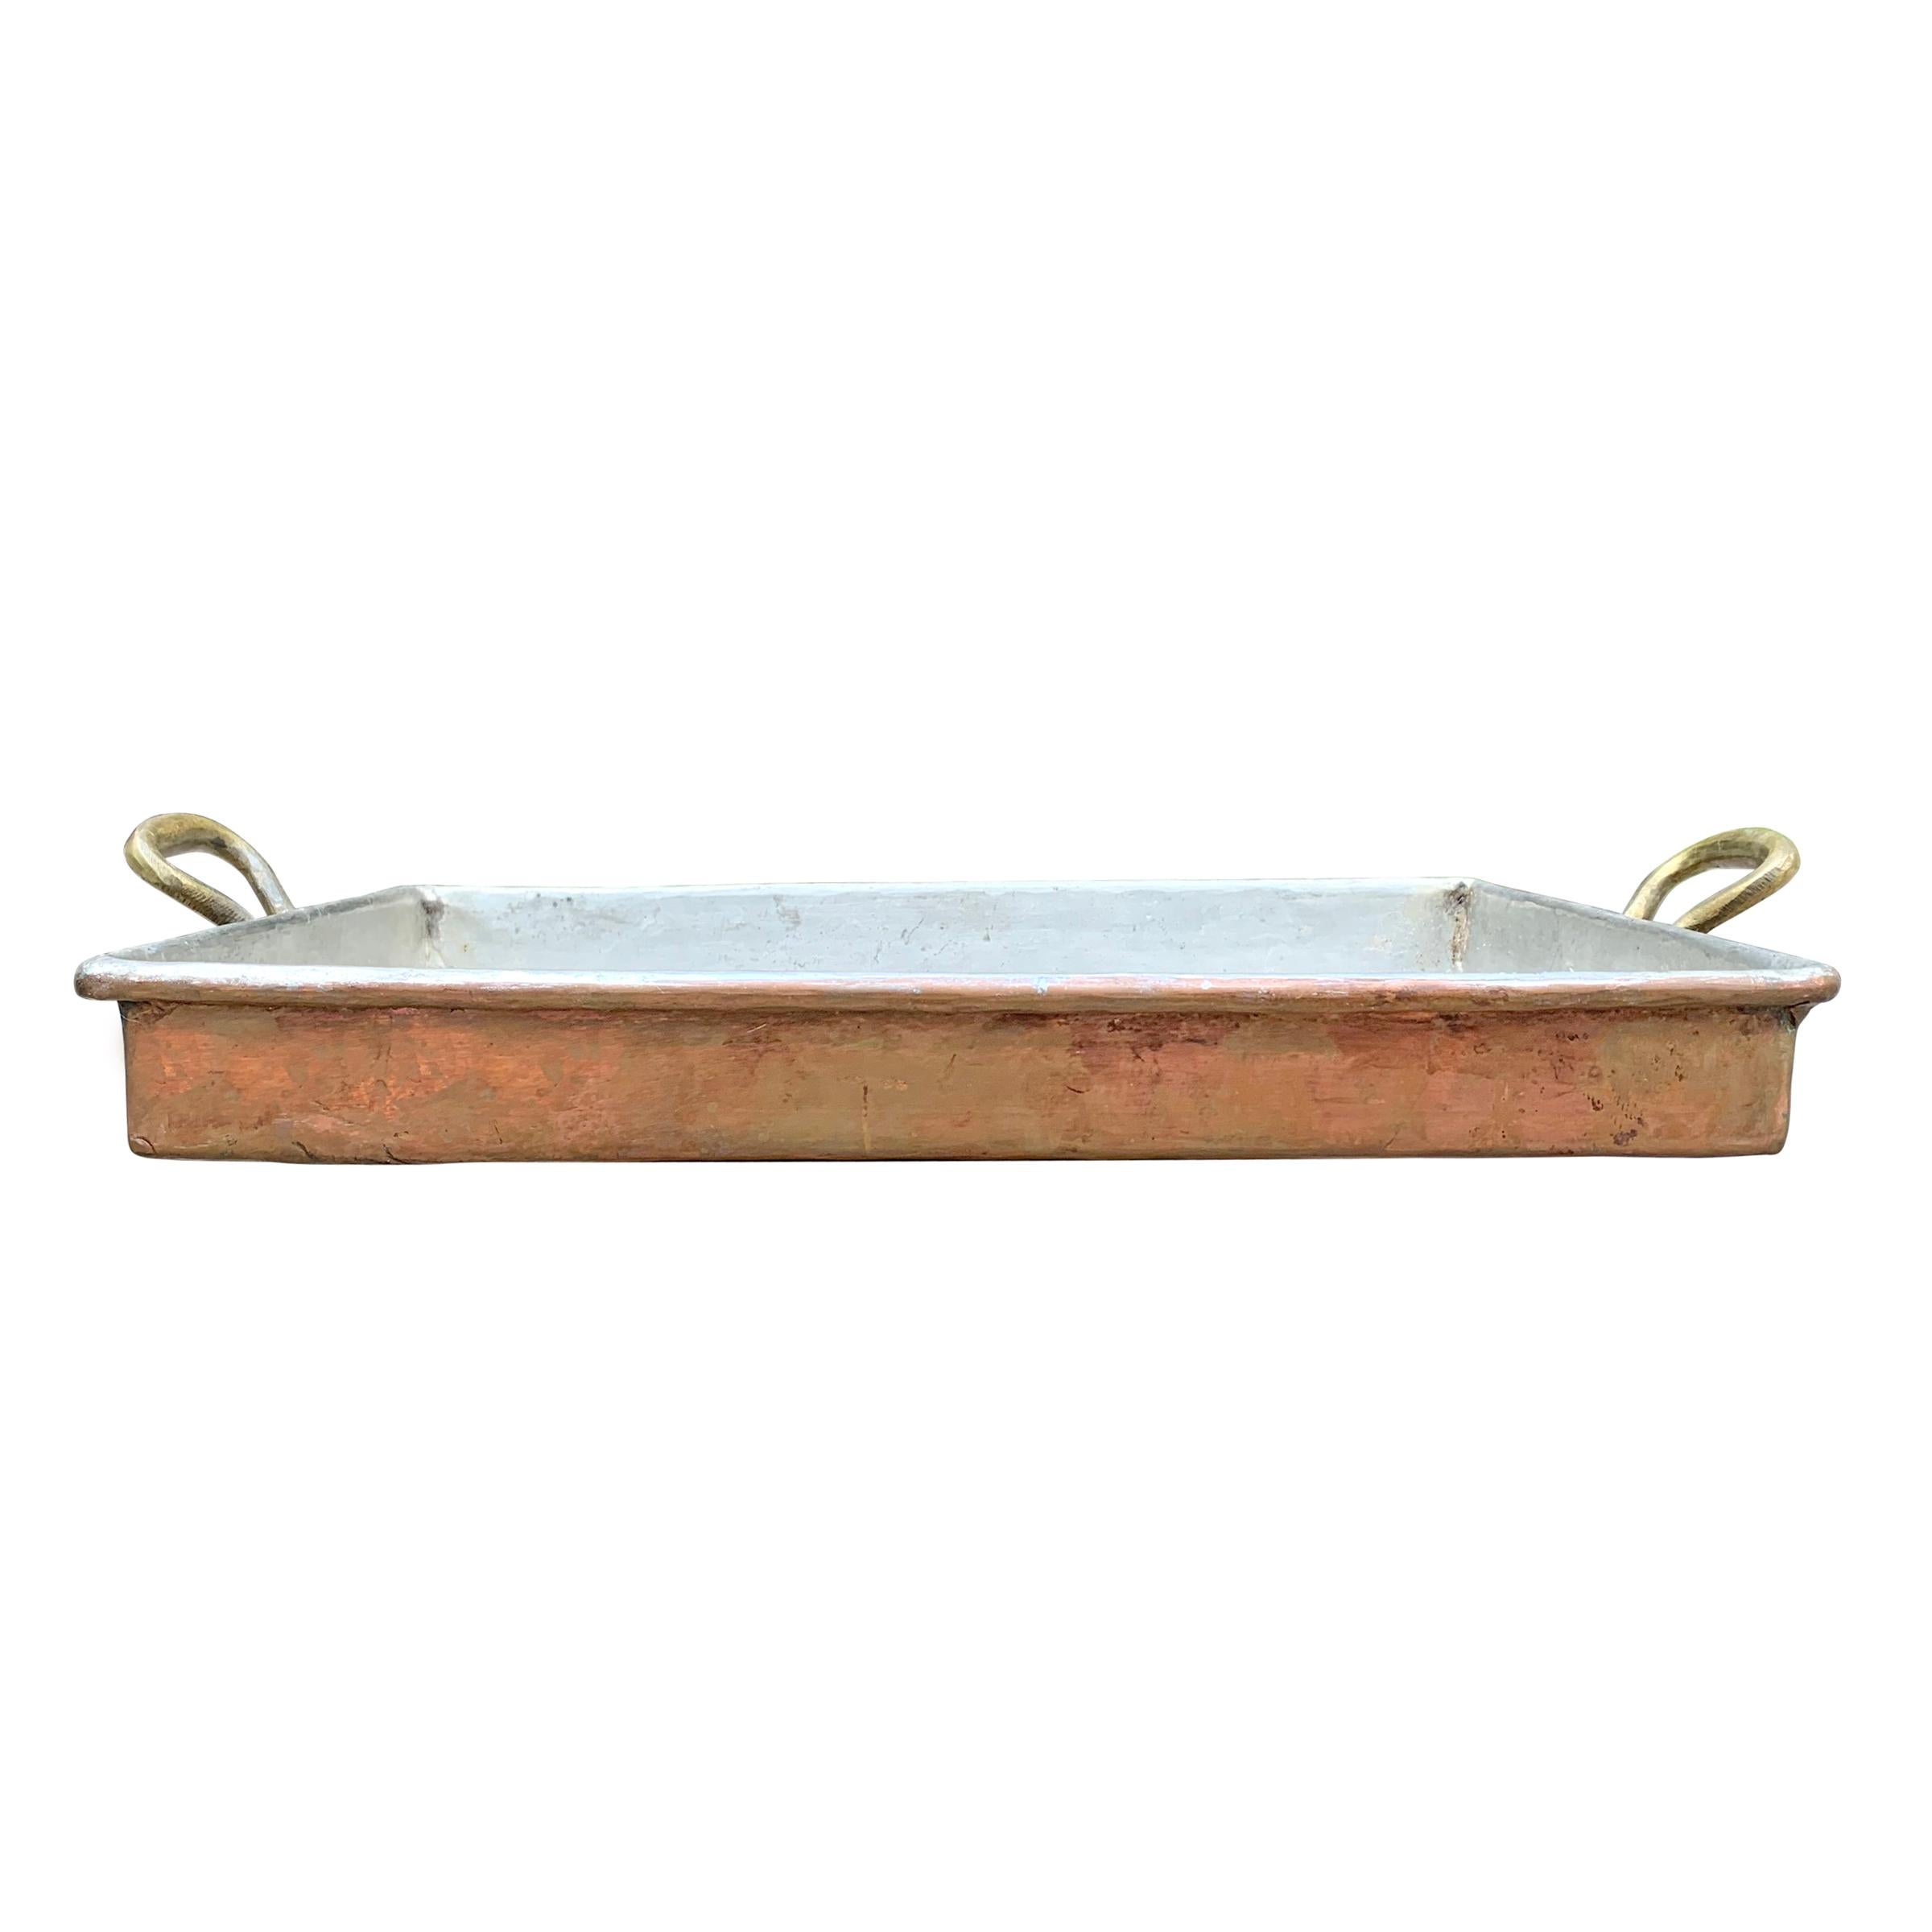 A fantastic mid-20th century French copper roasting pan with a rolled edge, tin lining, and heavy bronze handles, perfect for your next Sunday roast or Thanksgiving turkey. Pan is ready to use, but we are happy to polish and re-tin for an additional